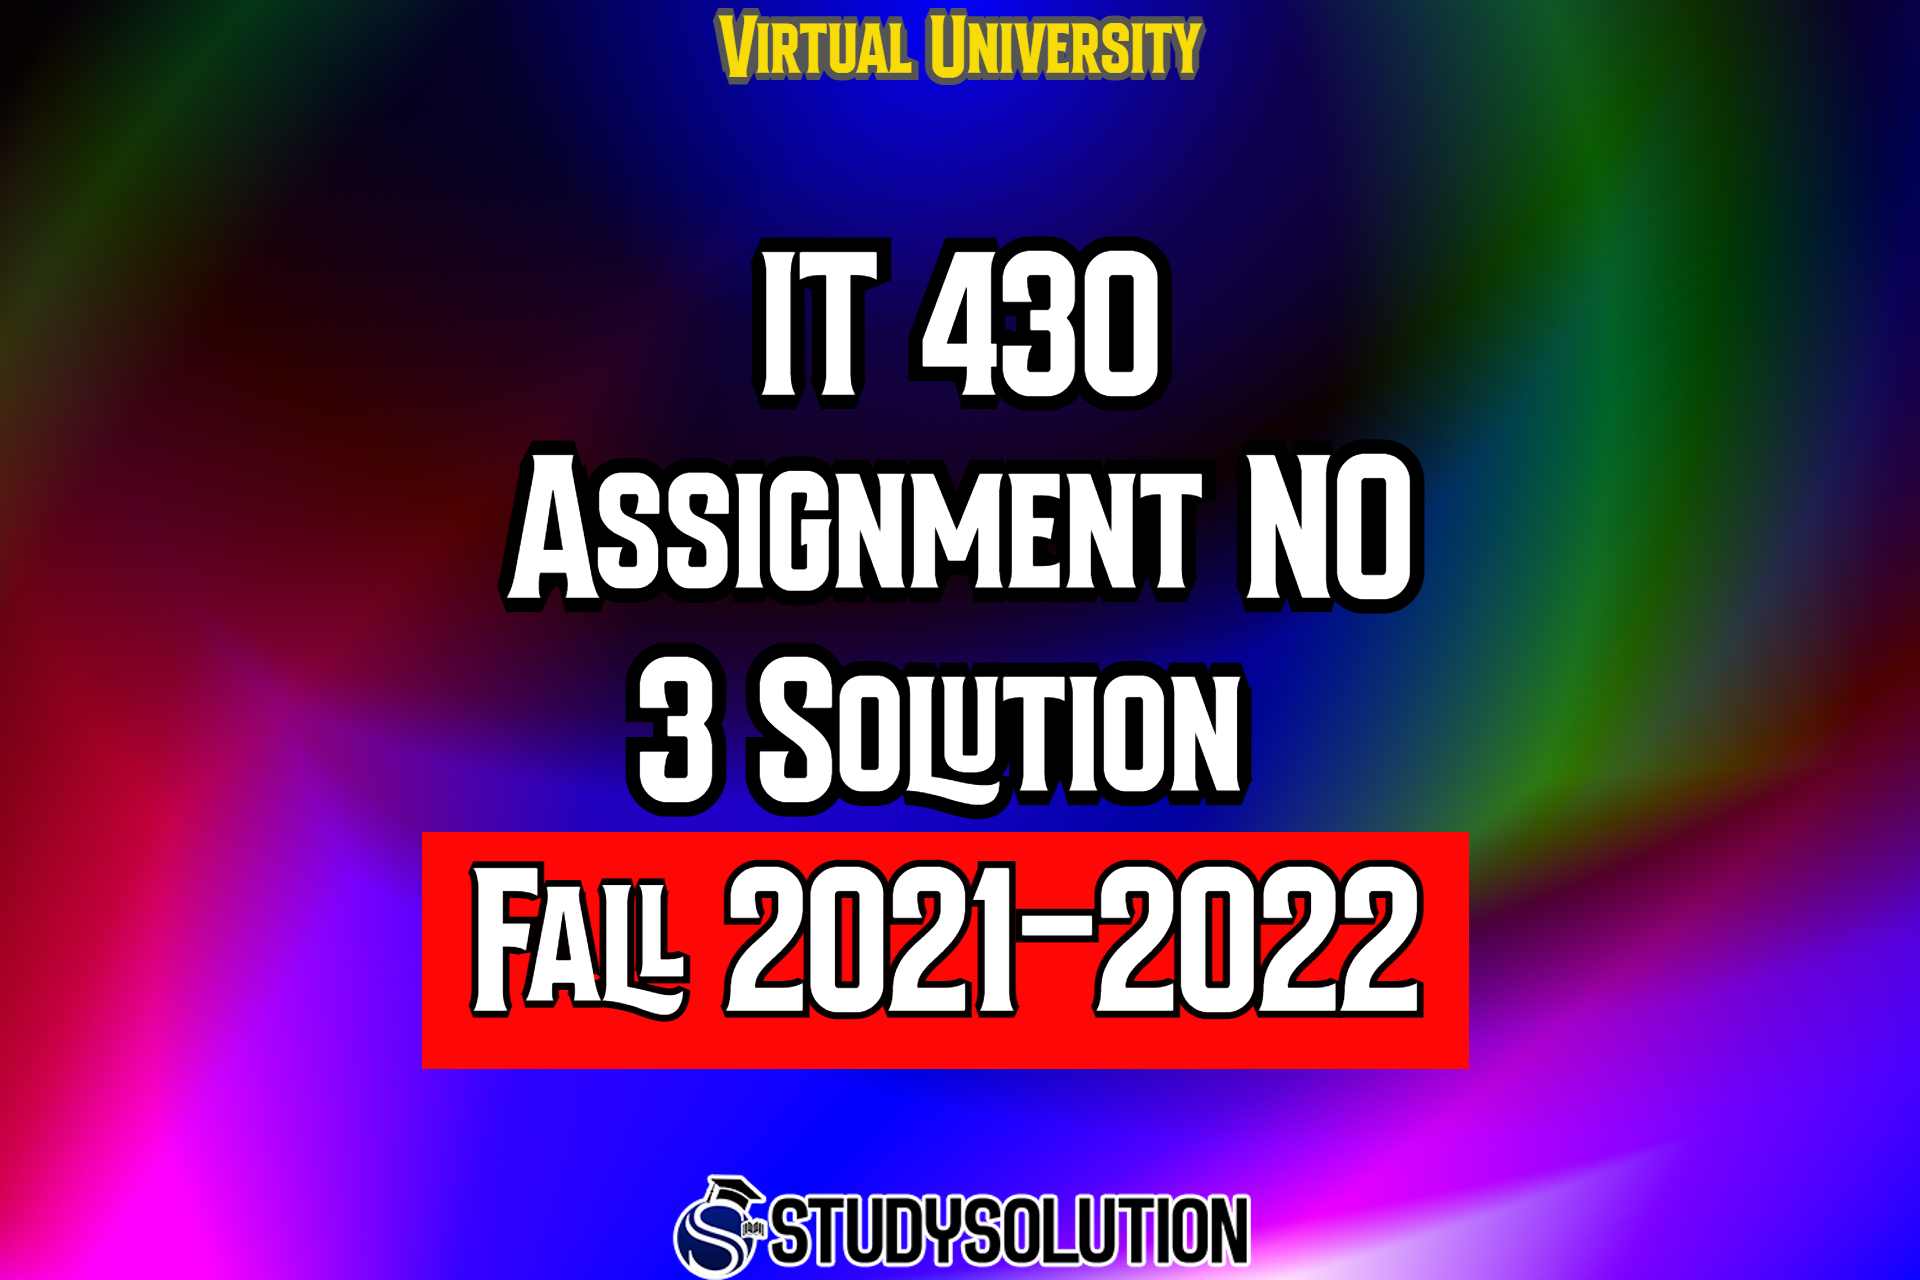 IT430 Assignment No 3 Solution Fall 2022